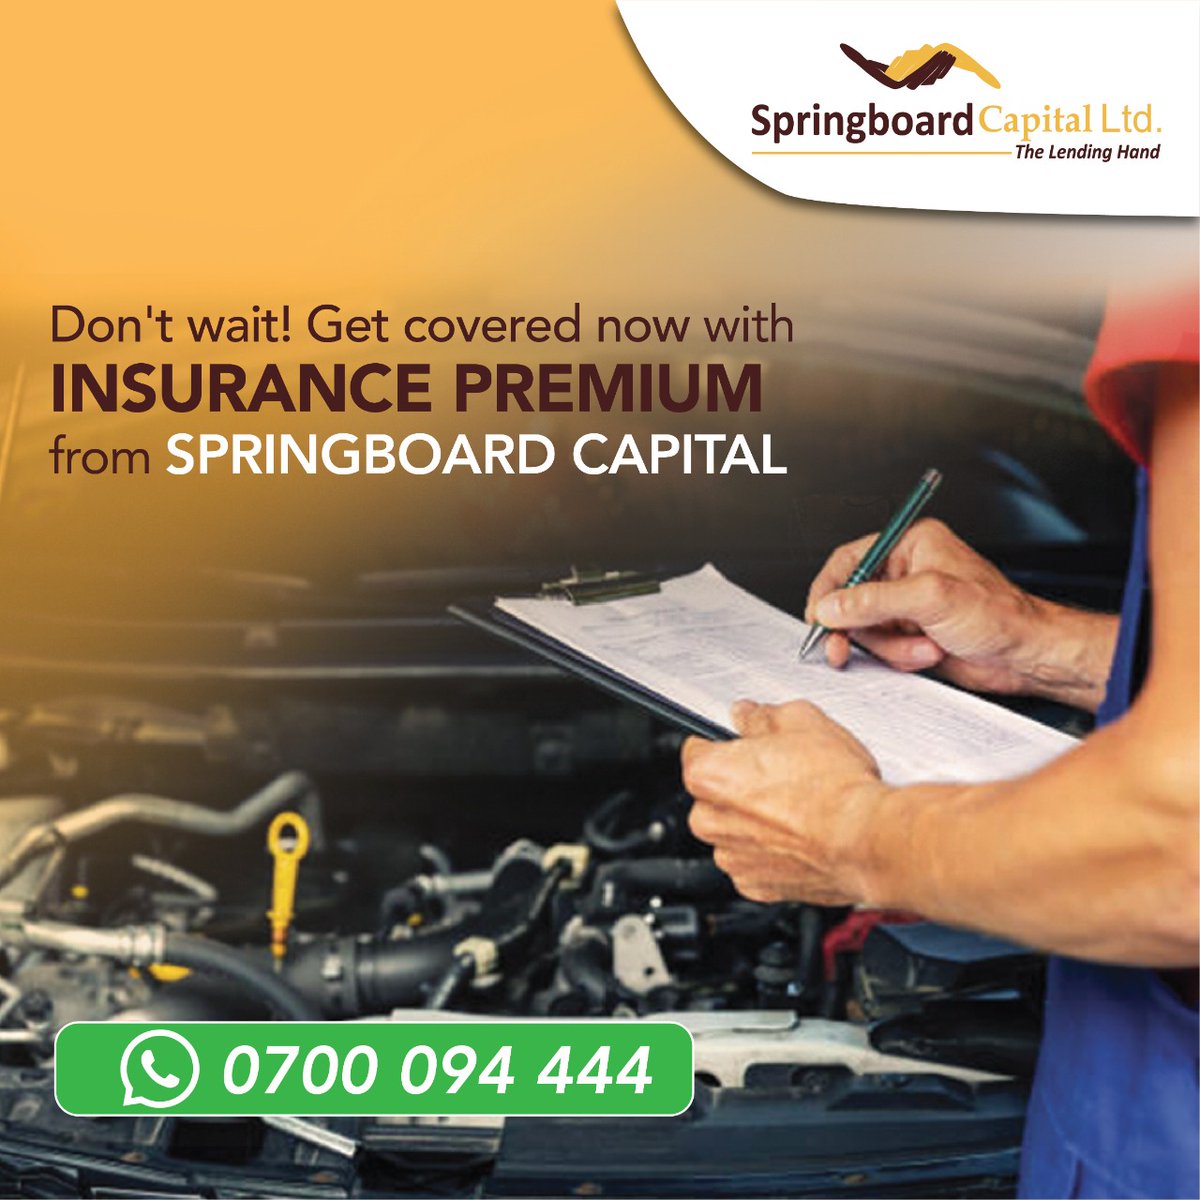 Relax and enjoy your peace of mind today knowing that your asset is covered.🚗 Apply for Springboard Capital's Insurance Premium  today by visiting our website: springboardcapital.co.ke/insurance-prem… or Call/WhatsApp 0700094444 today.

#SBC #TheLendingHand #InsurancePremium #CarInsurance